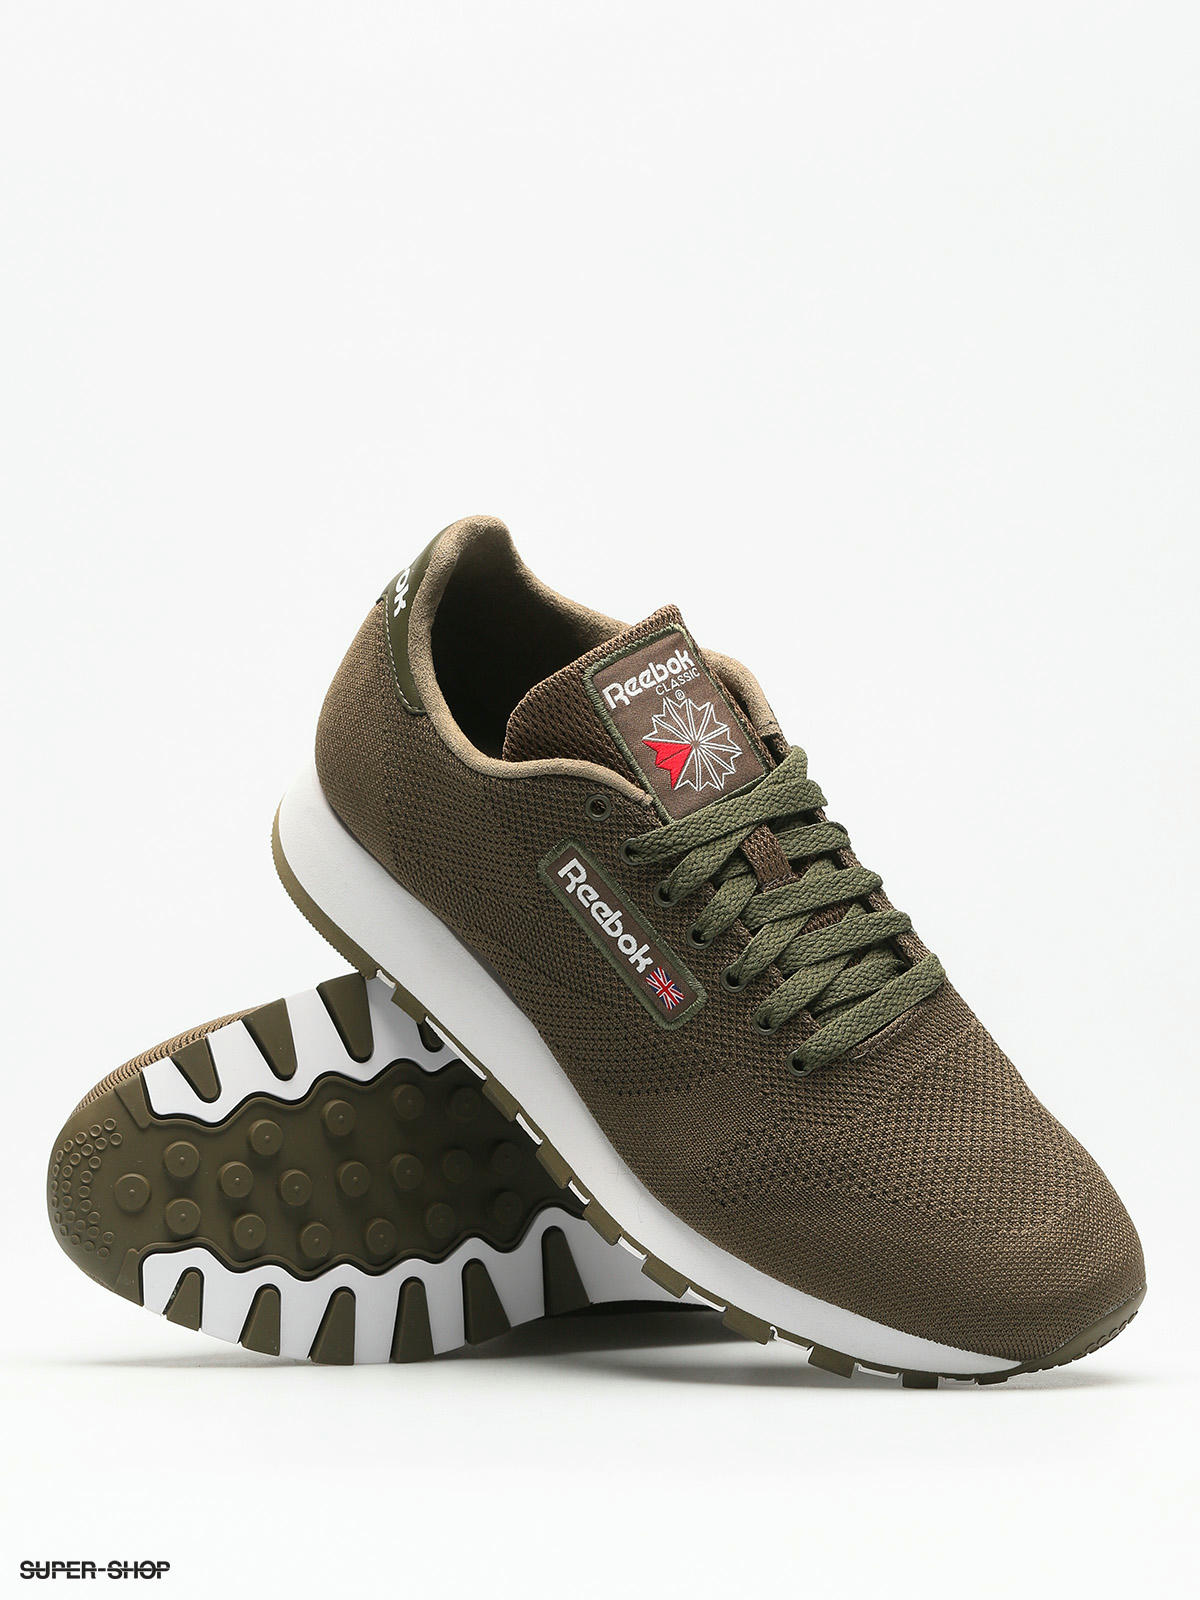 Reebok Shoes Cl Leather Ultk (army green/white)